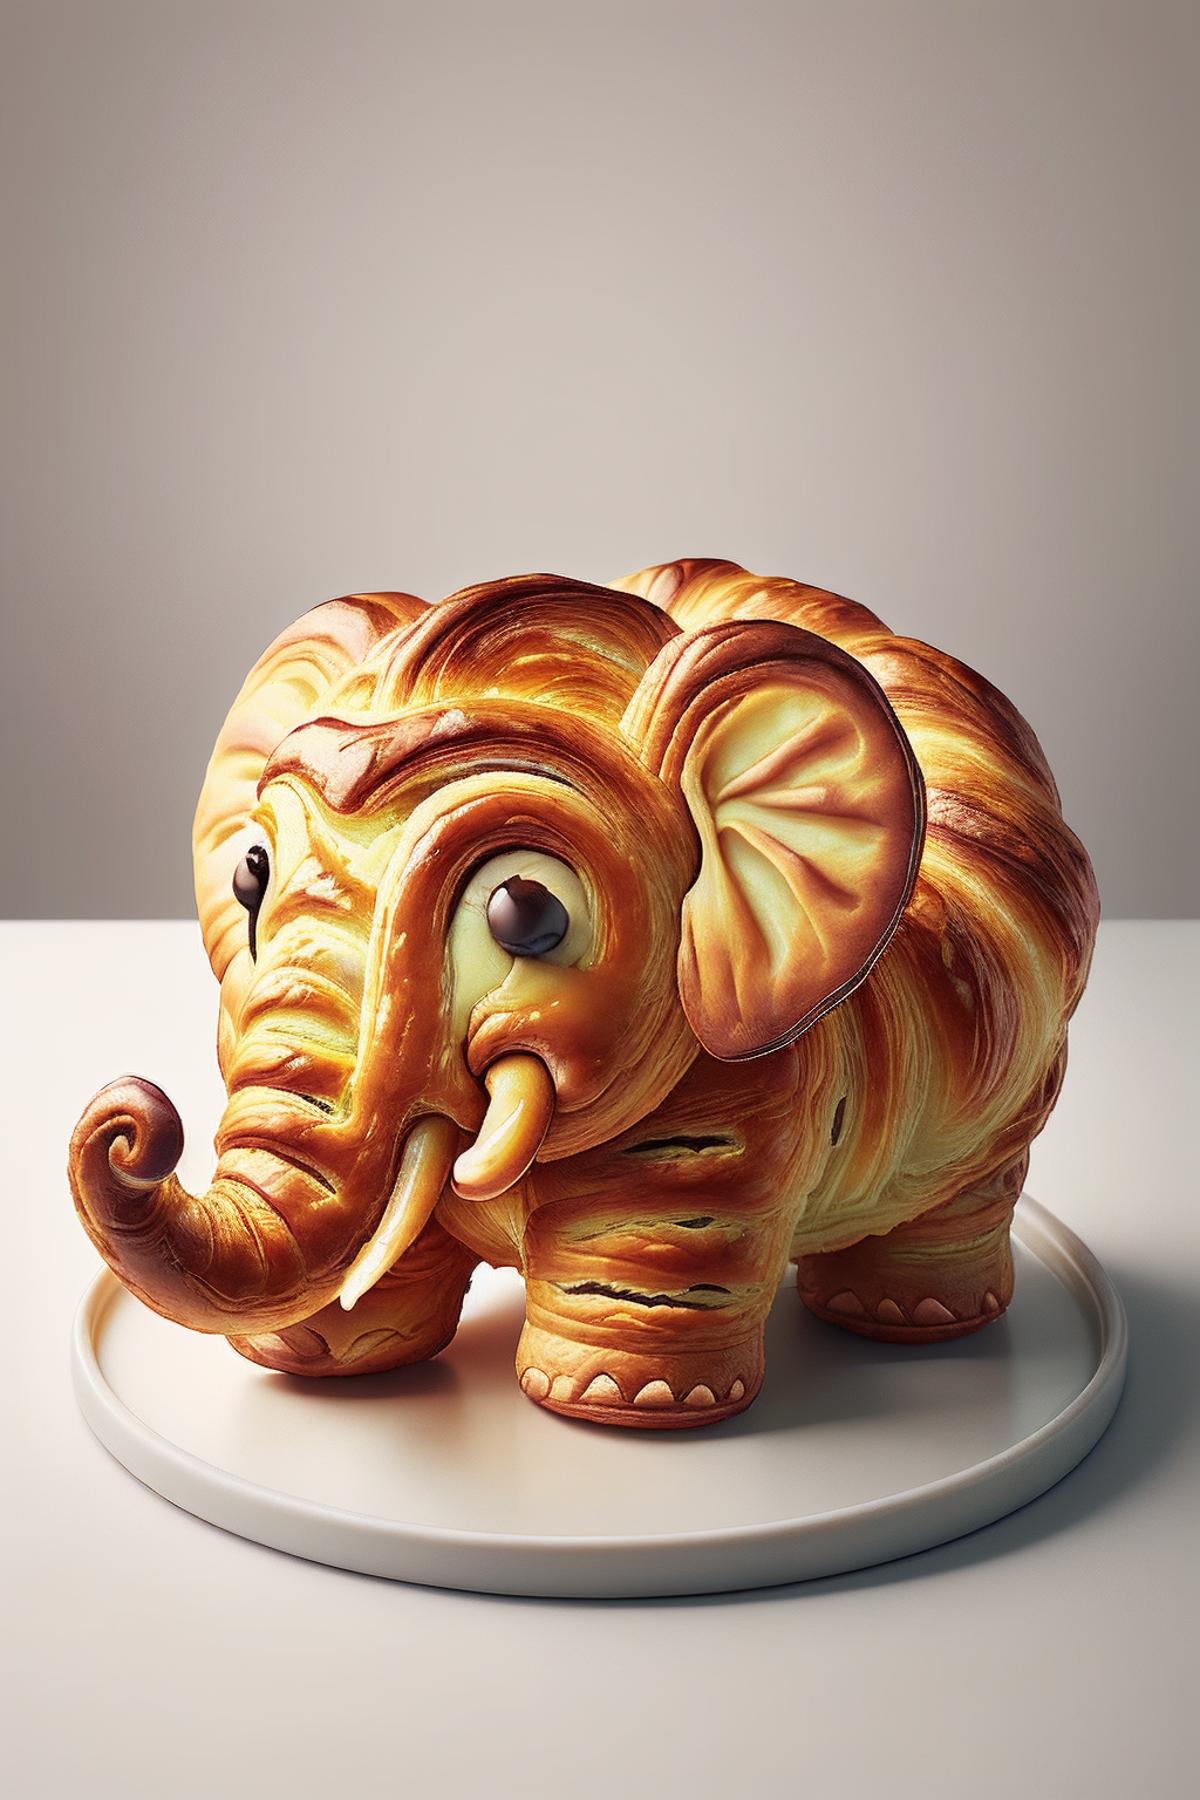 A large, baked elephant with a tray on its back.